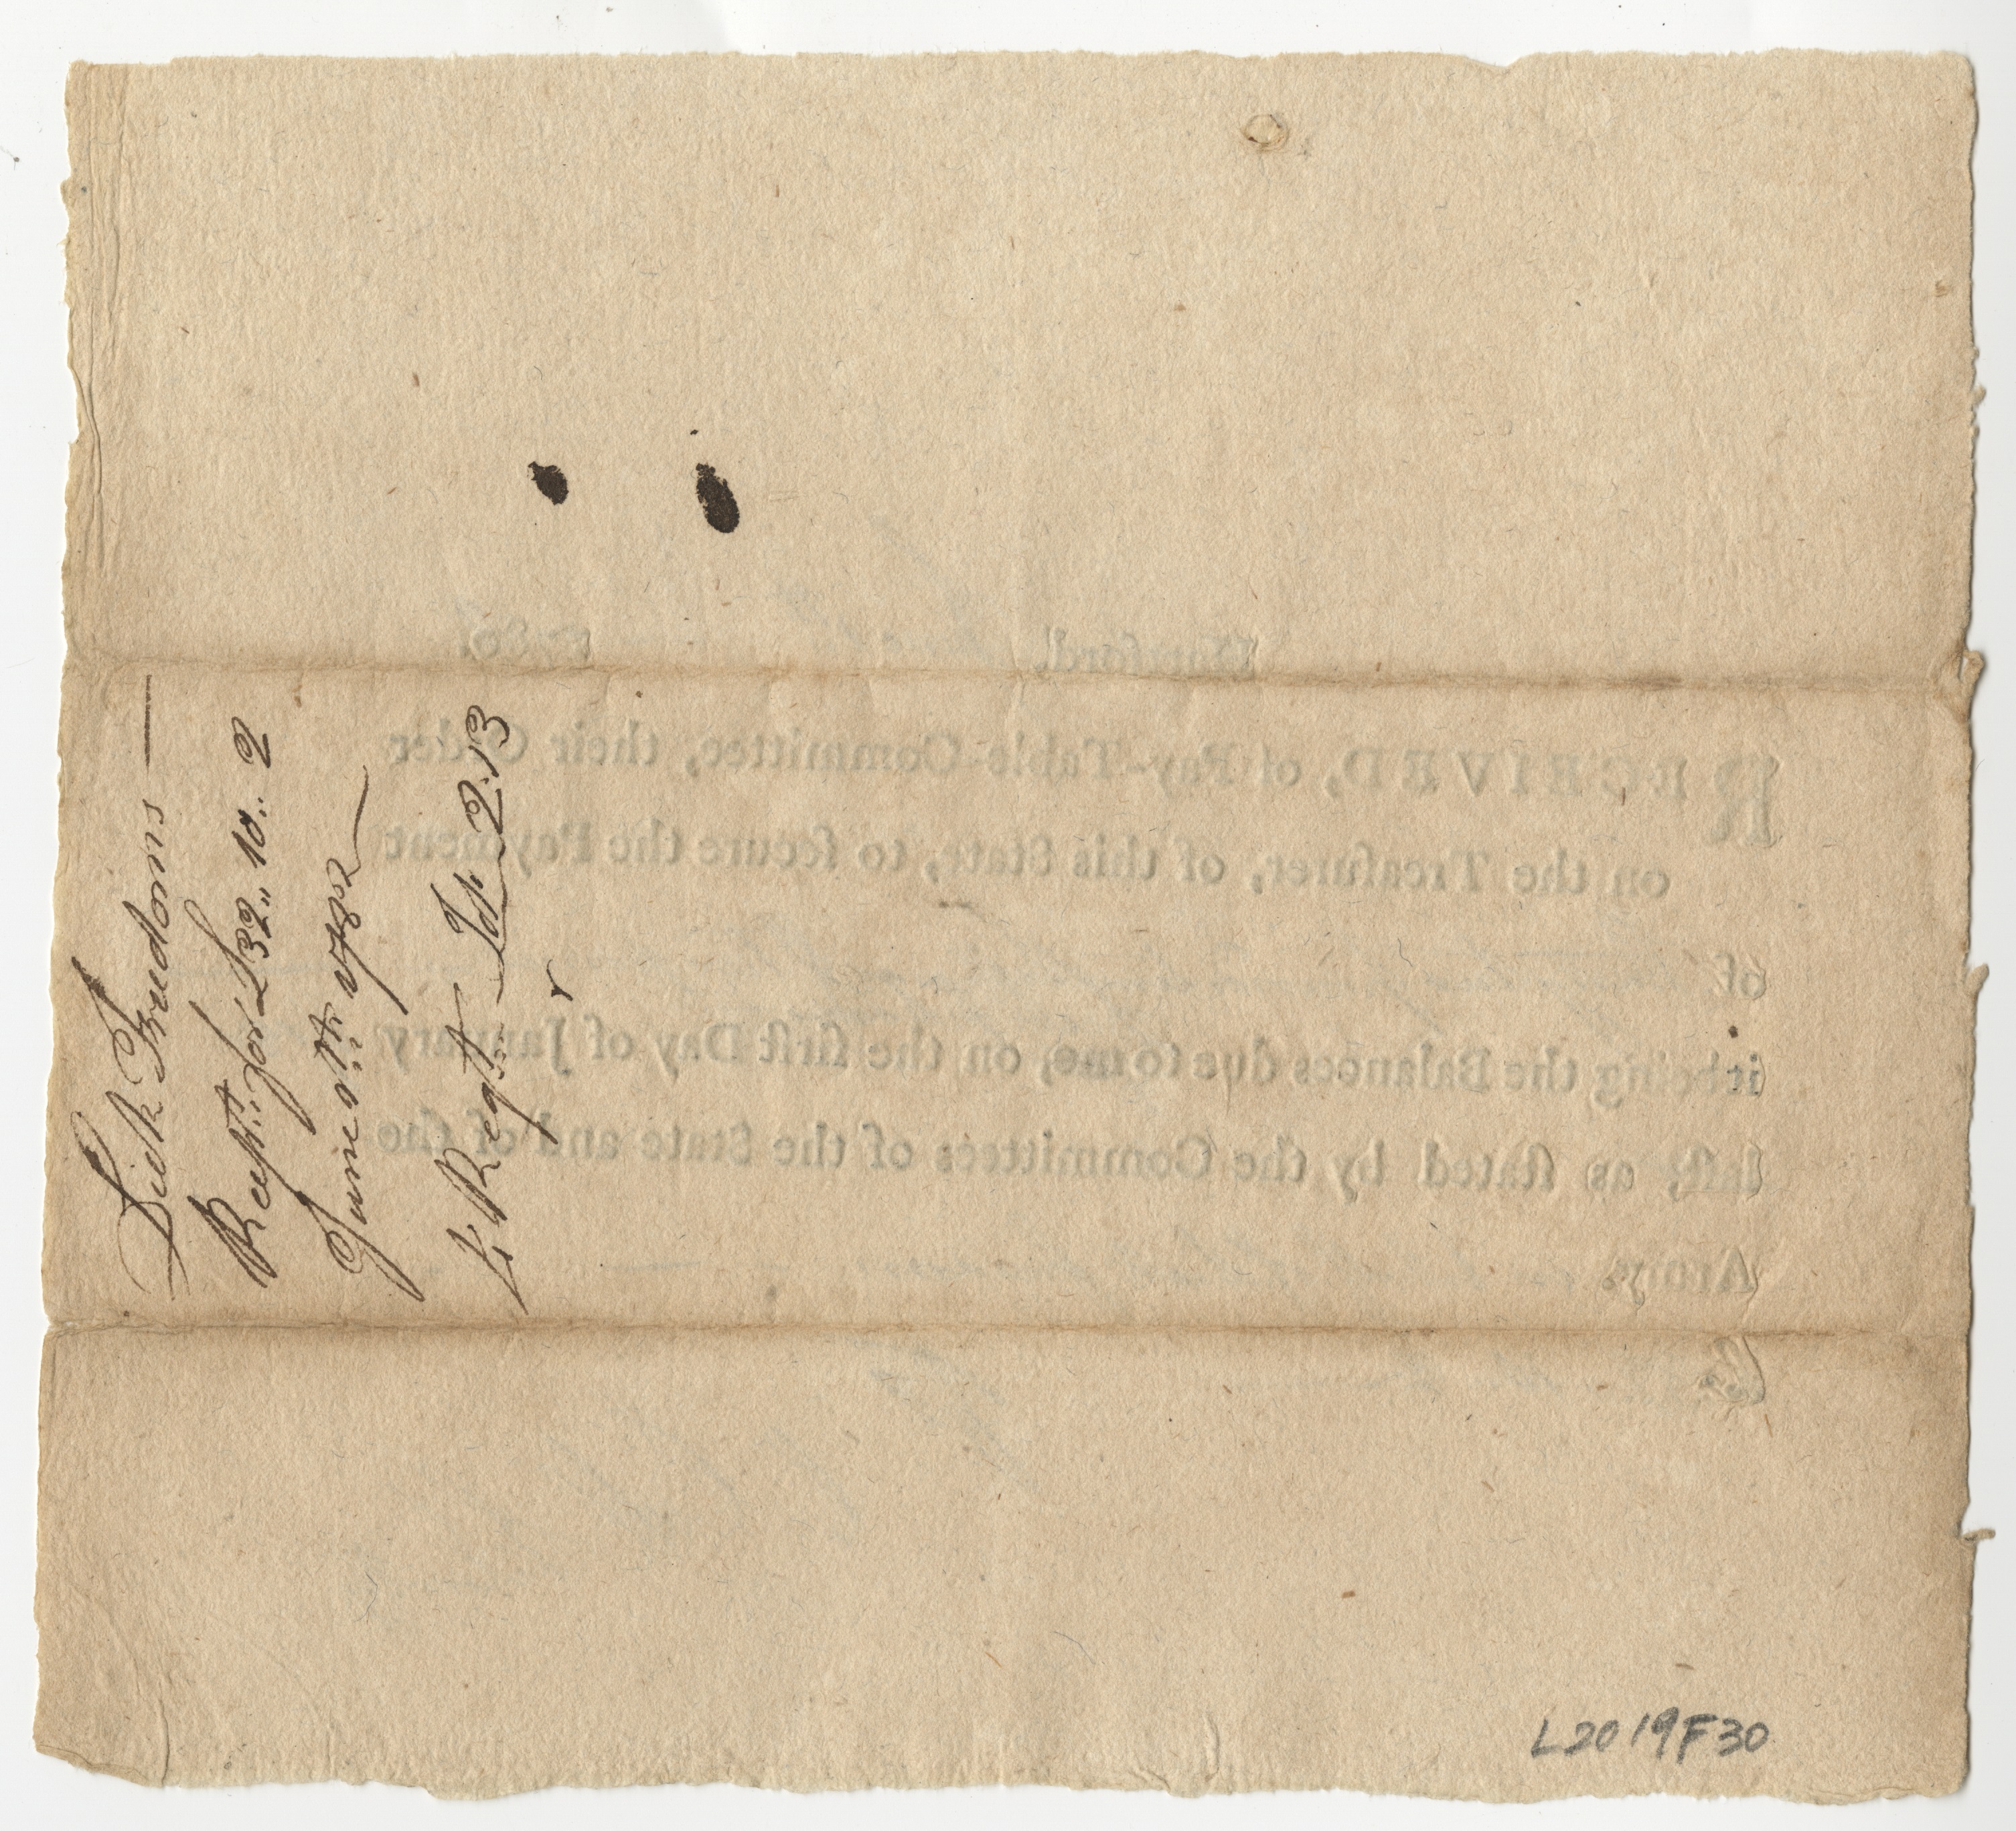 Receipt of Pay-Table-Committee, June 7, 1782